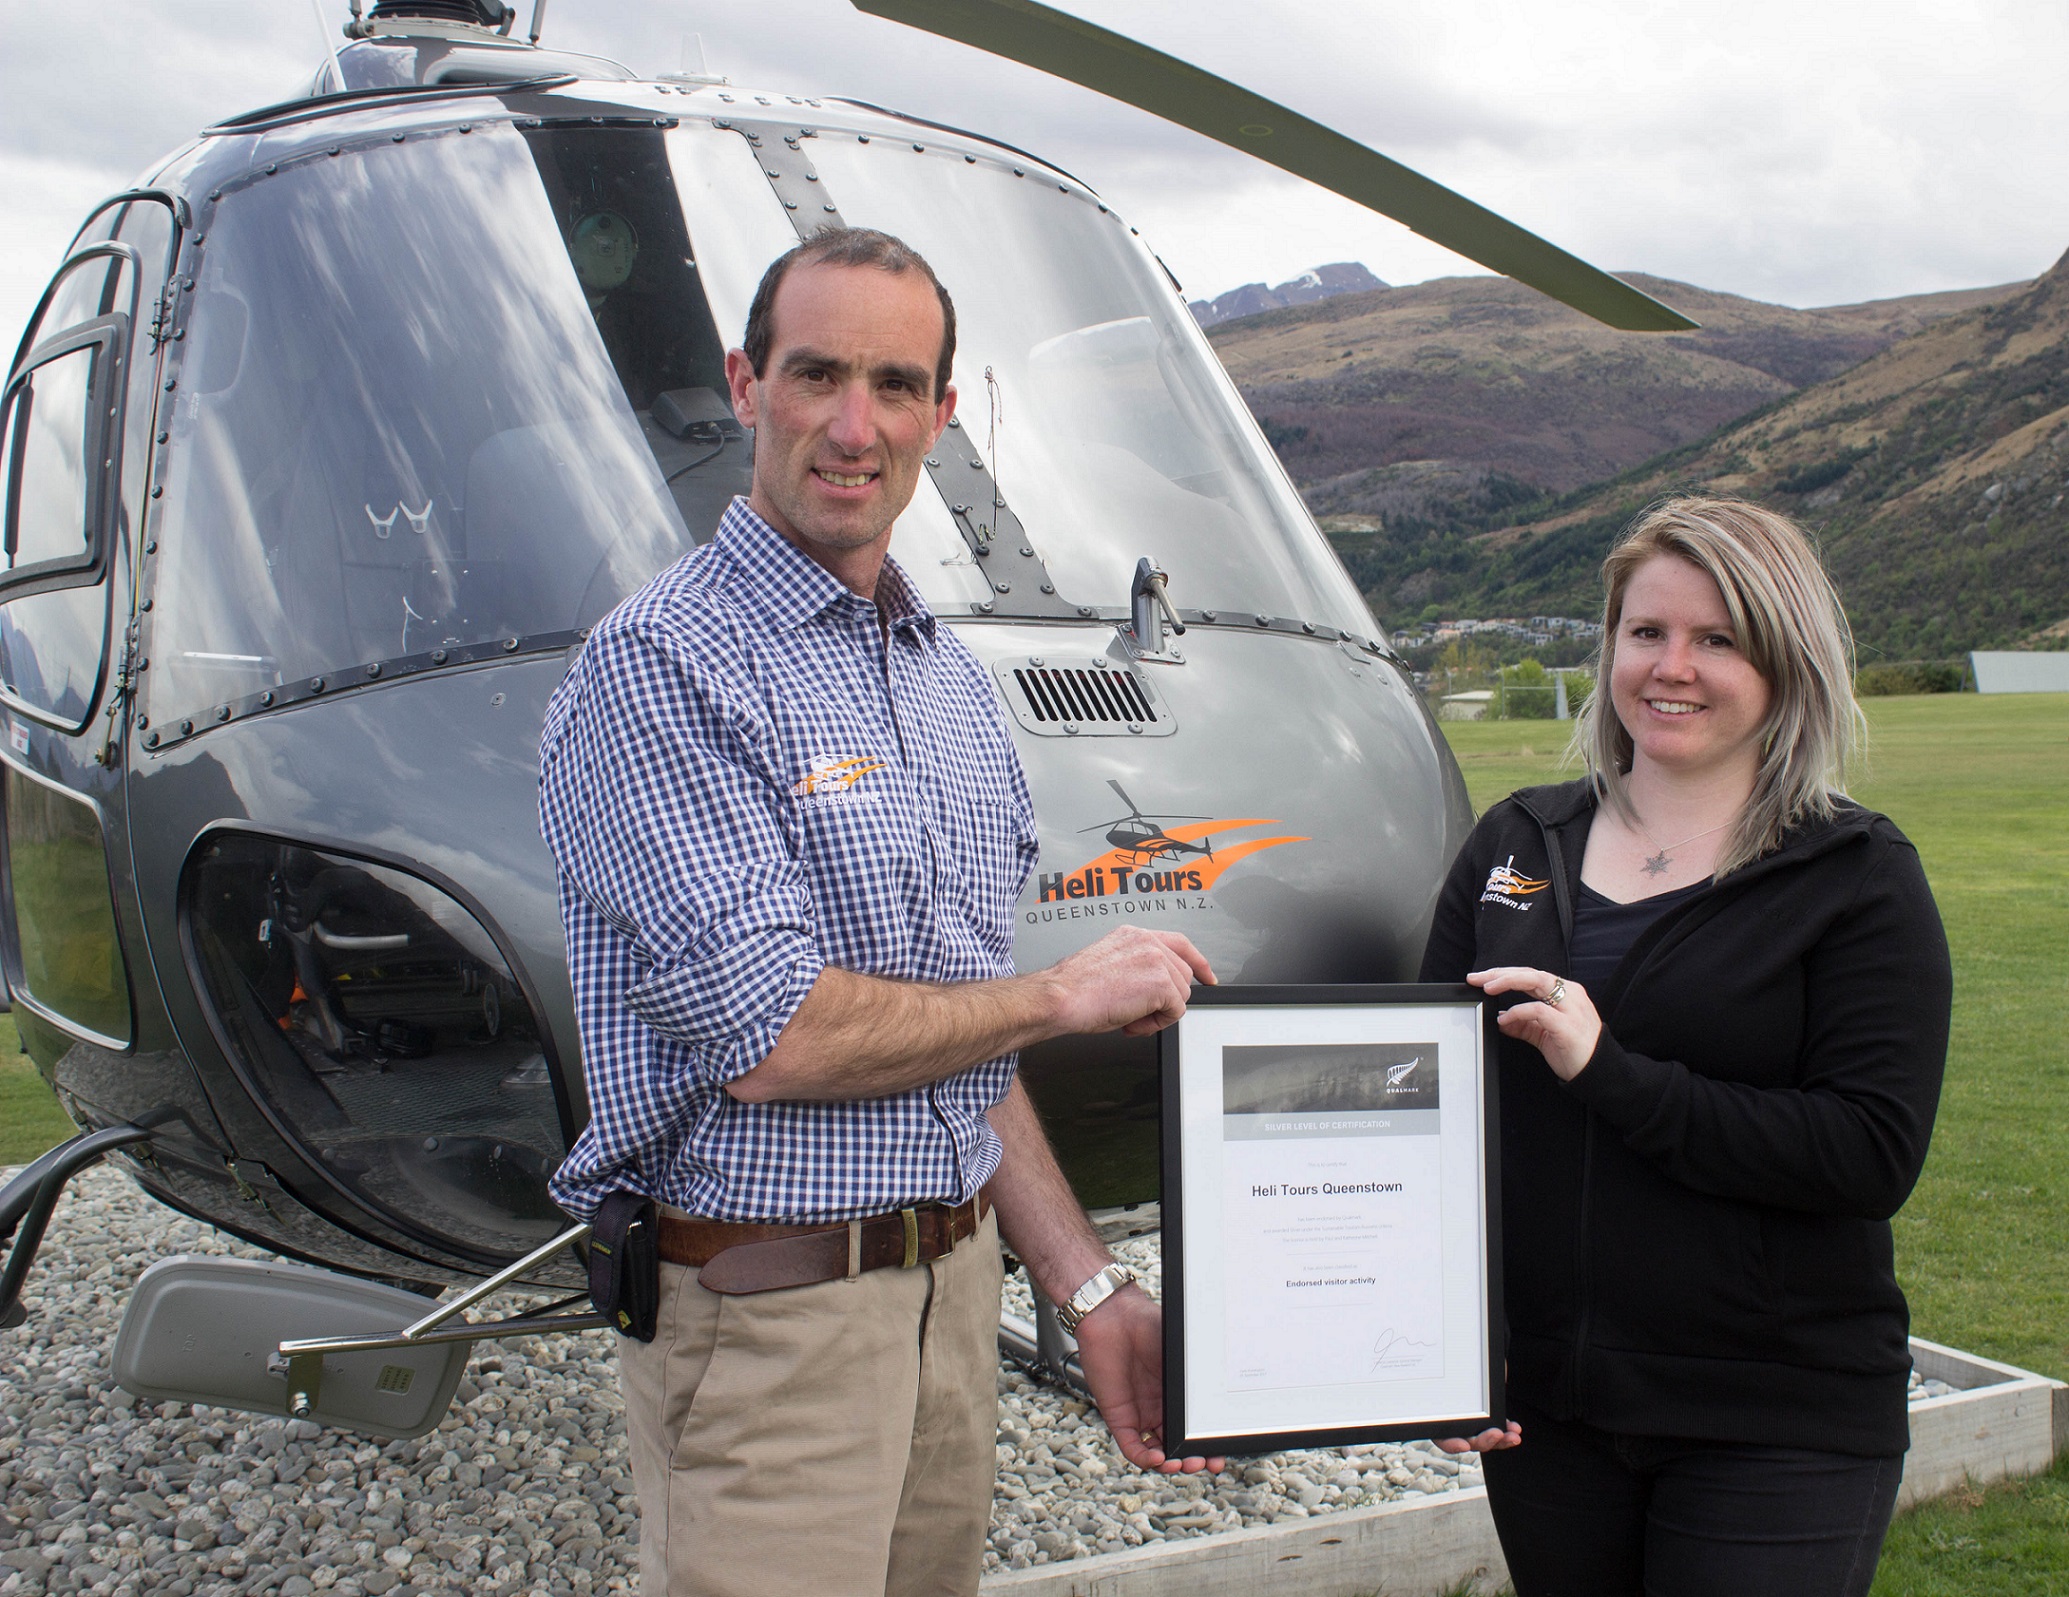 Heli Tours owner Paul Mitchell and Base Manager Jaime Flemming celebrate their Qualmark Silver award